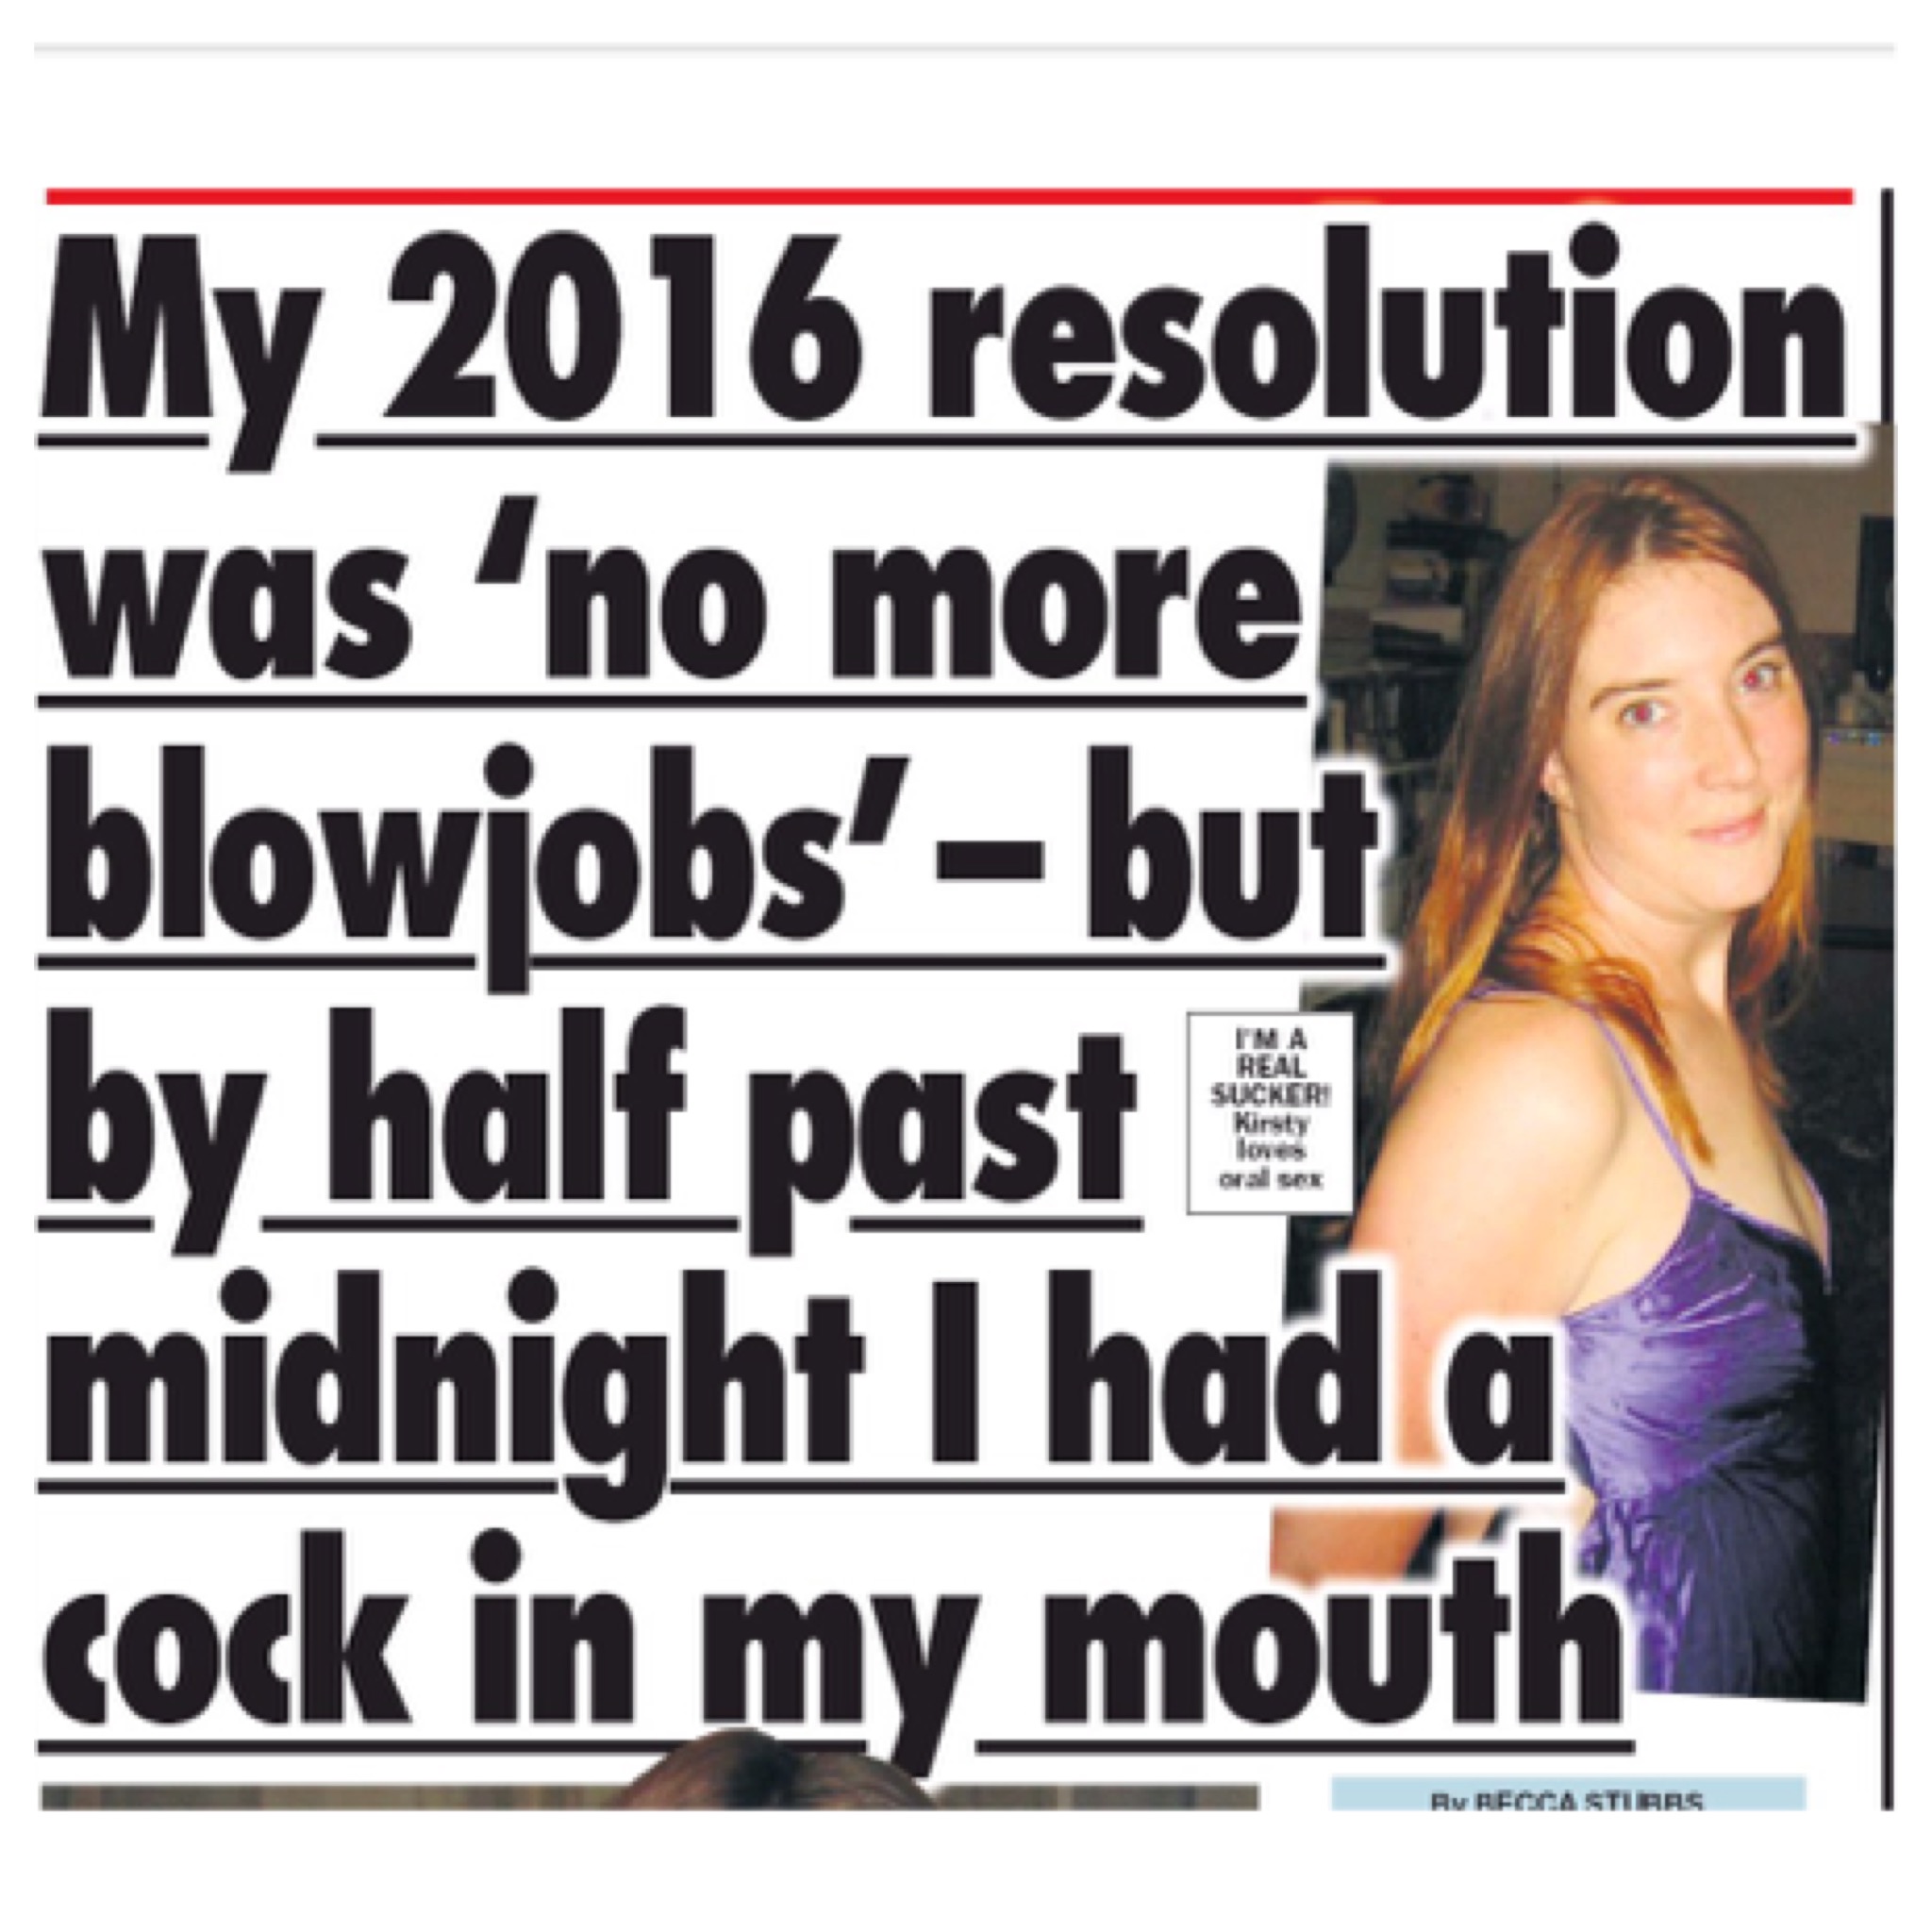 christel lawrence recommends new year blowjobs pic